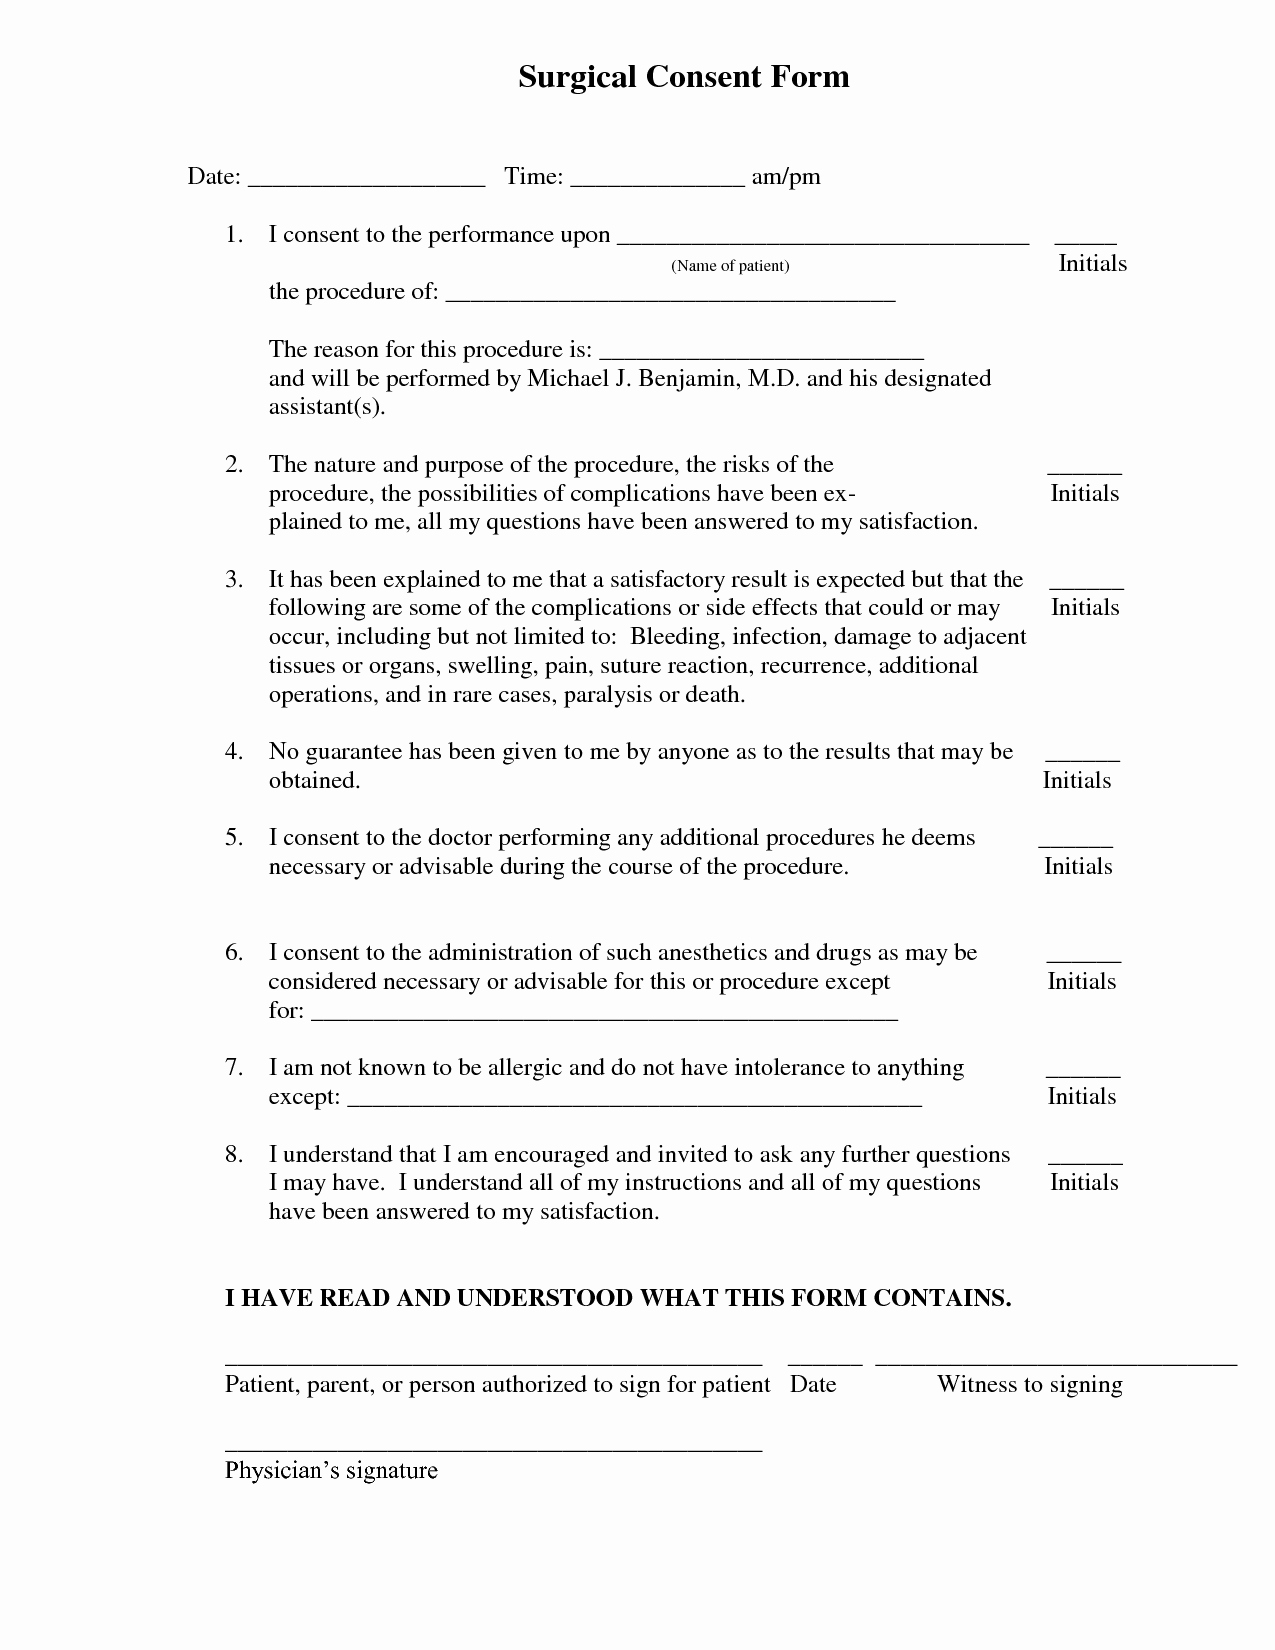 Medical Consent forms Templates Beautiful Surgical Consent form Template Consent form